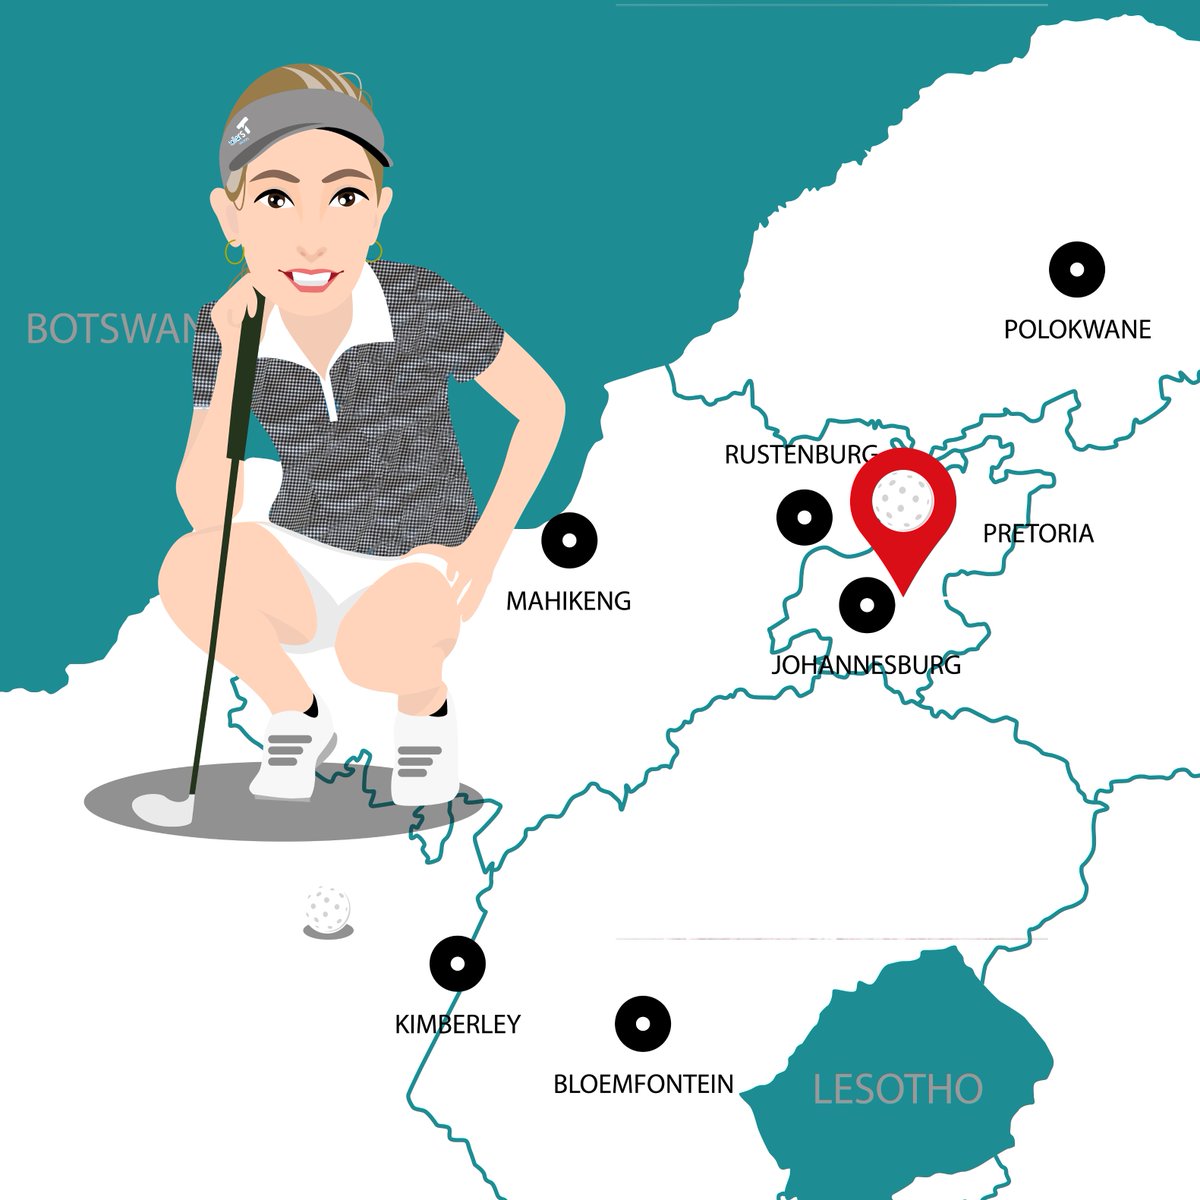 Where’s Lauren? This week @lauren_taylor94 is competing in the @JoburgOpen_ which is part of @LETgolf co-sanctioned with the @SLadiesTour . 120 ladies will participate over the next 4 days at Modderfontein Golf Club. Good Luck Lauren, we can’t wait to hear how you get on!